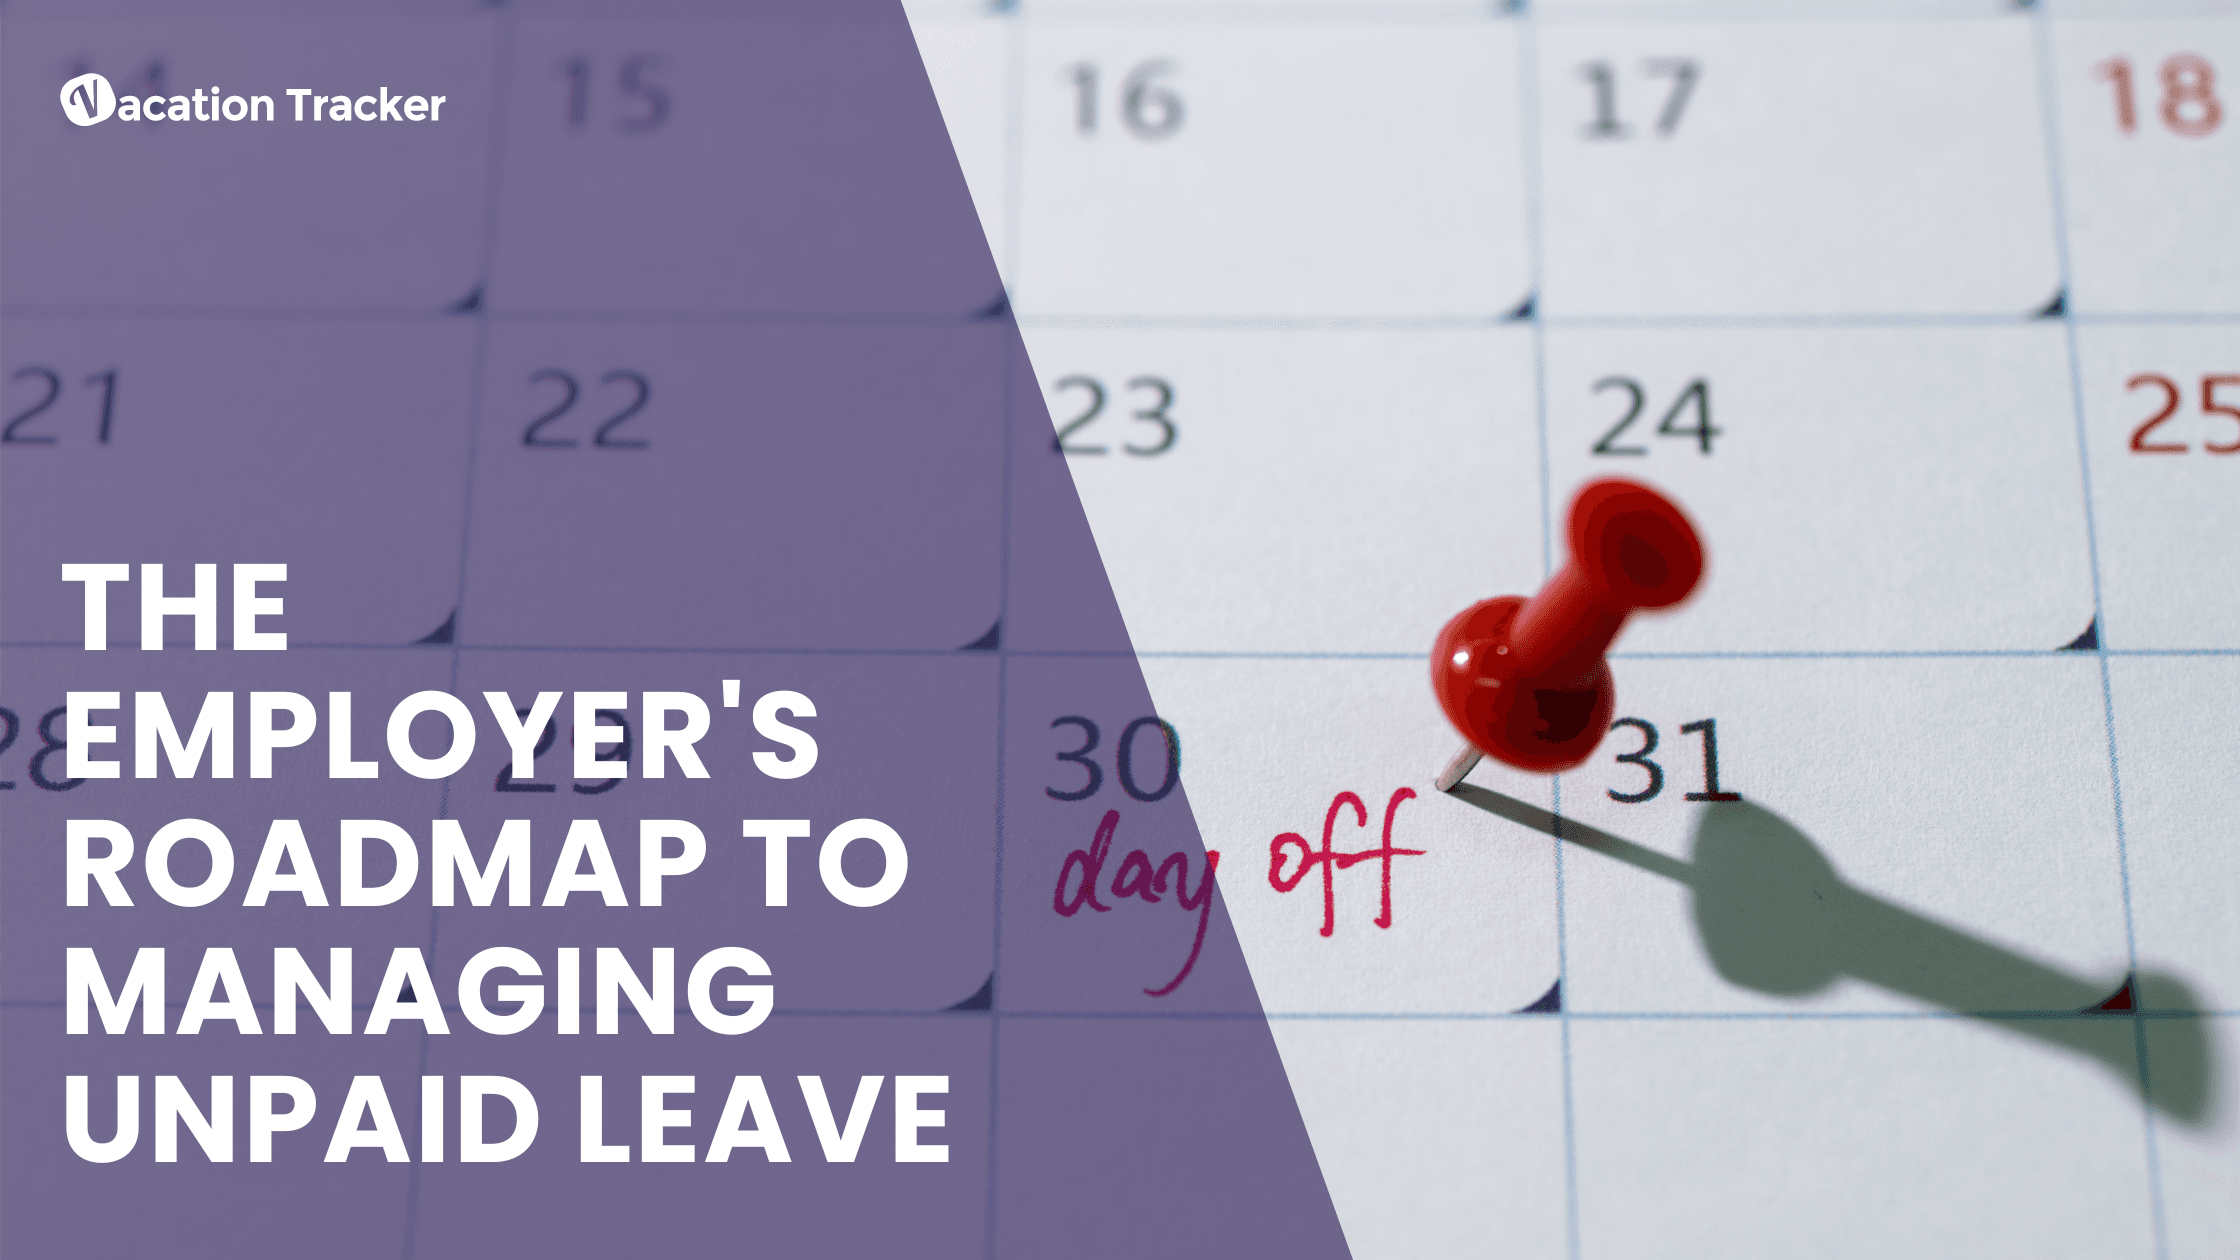 The Employer's Roadmap to Managing Unpaid Leave